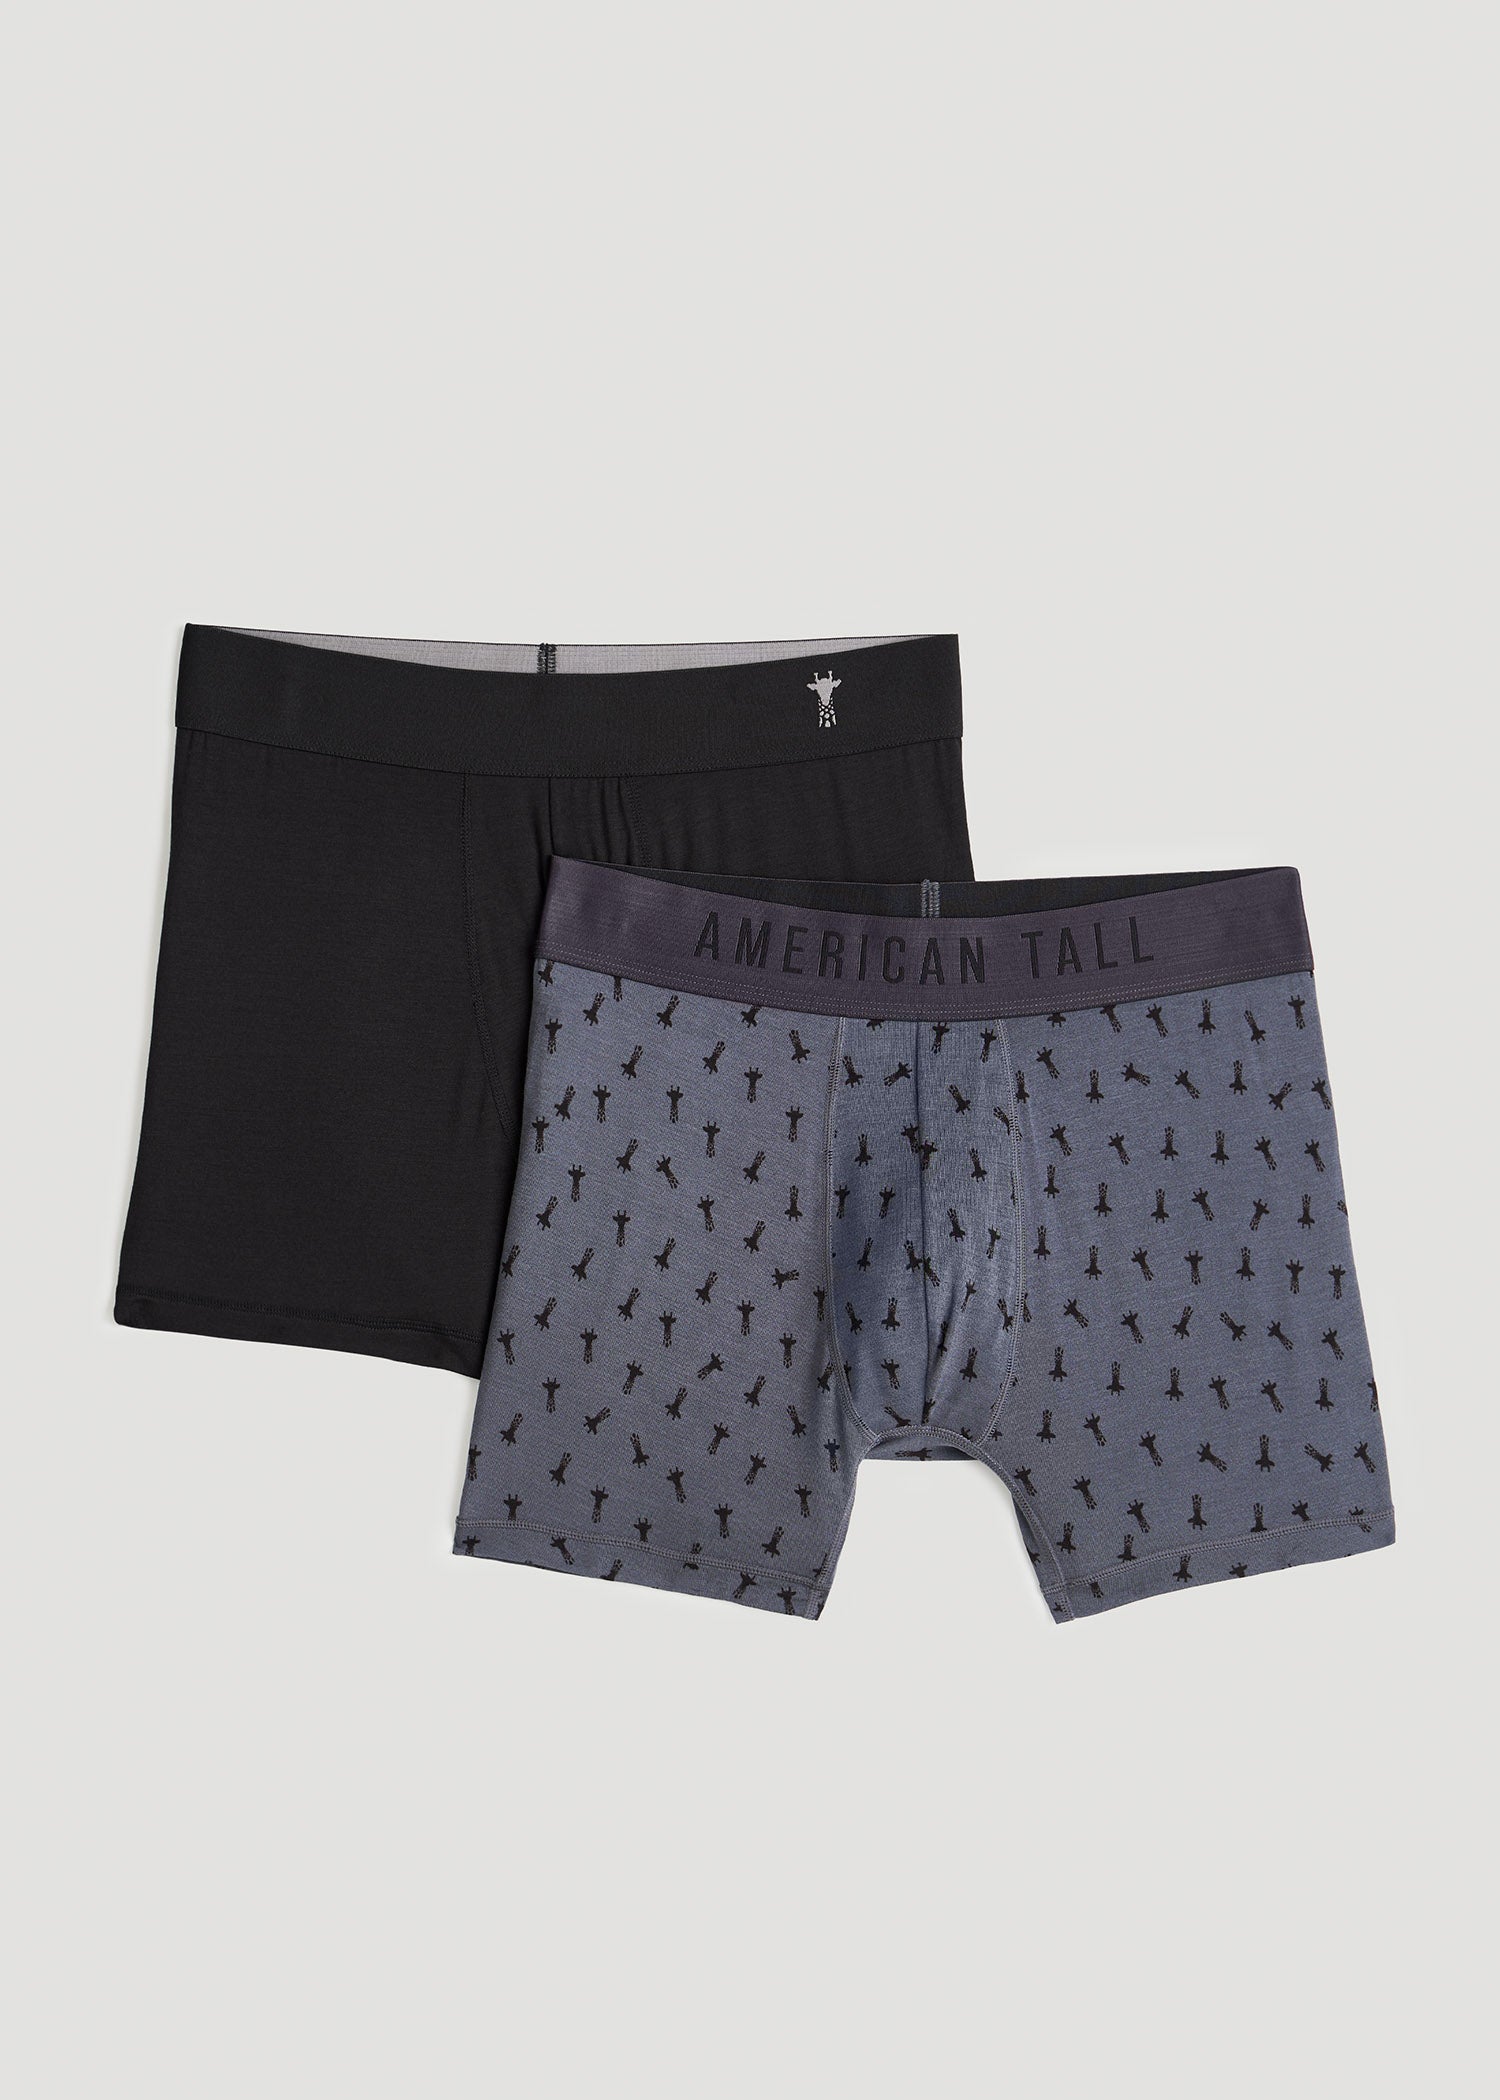 Modal Stretch Printed Trunks with Branded Elastic